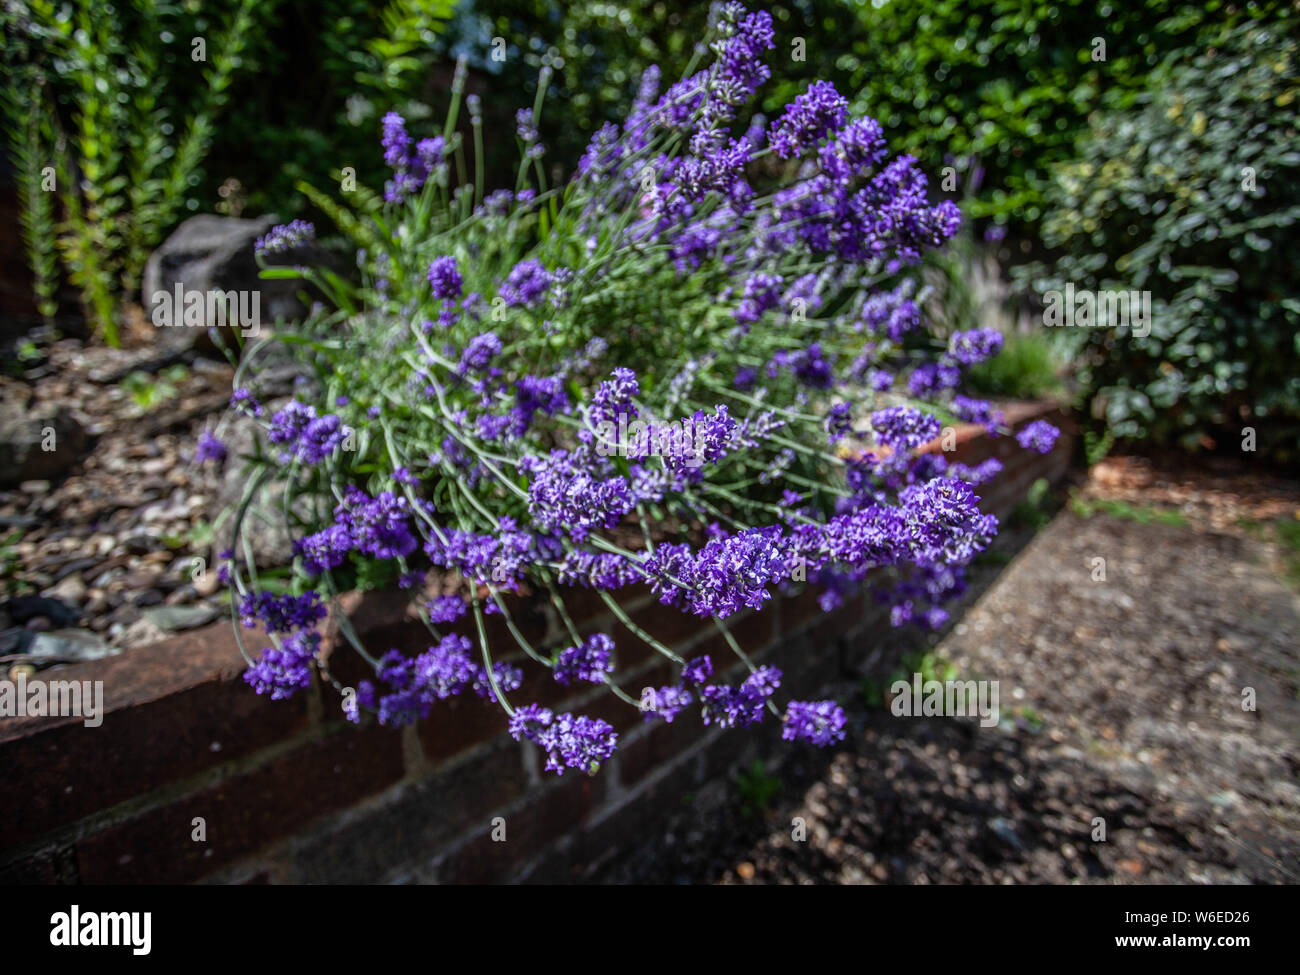 Protruding lavender flowers in a garden, London, England, UK. Stock Photo